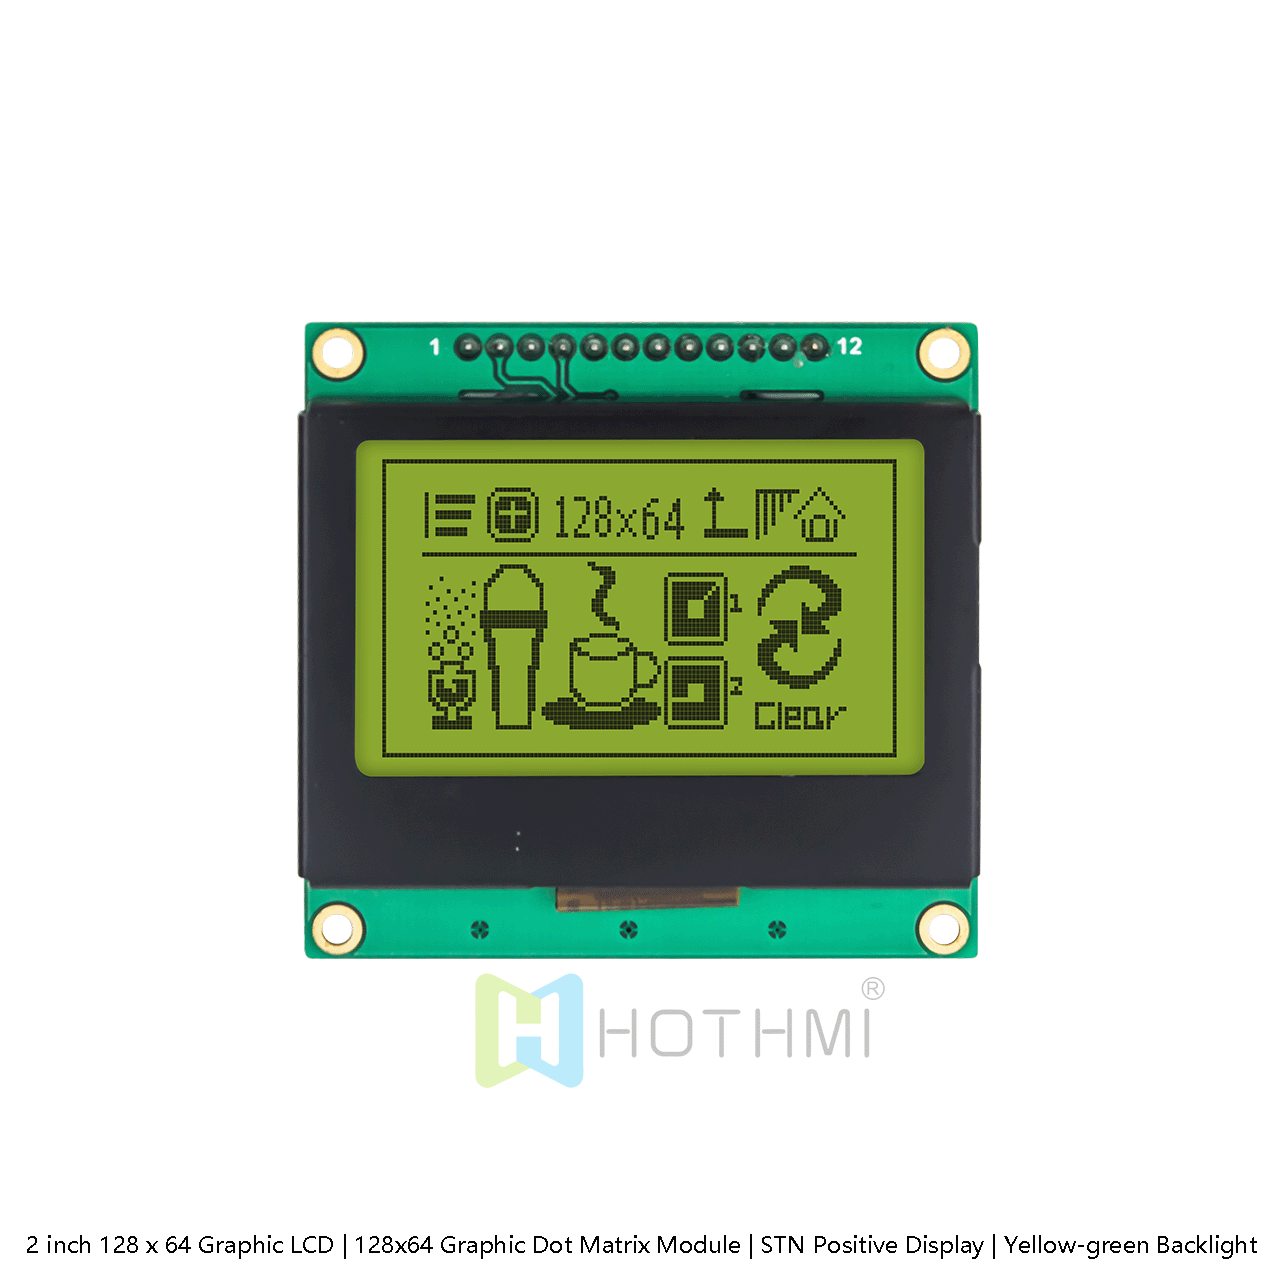 2 inch 128 x 64 Graphic LCD | 128x64 Graphic Dot Matrix Module | STN Positive Display | Yellow-green Backlight